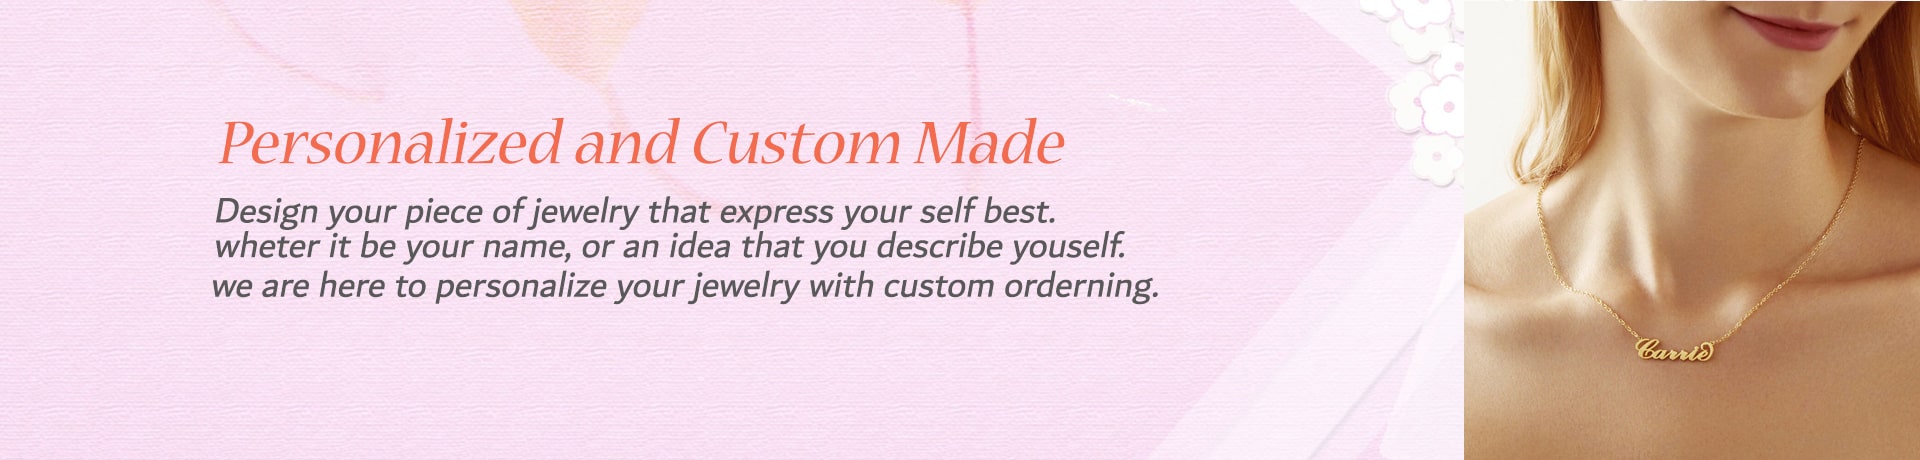 Personalized And Custom Made 